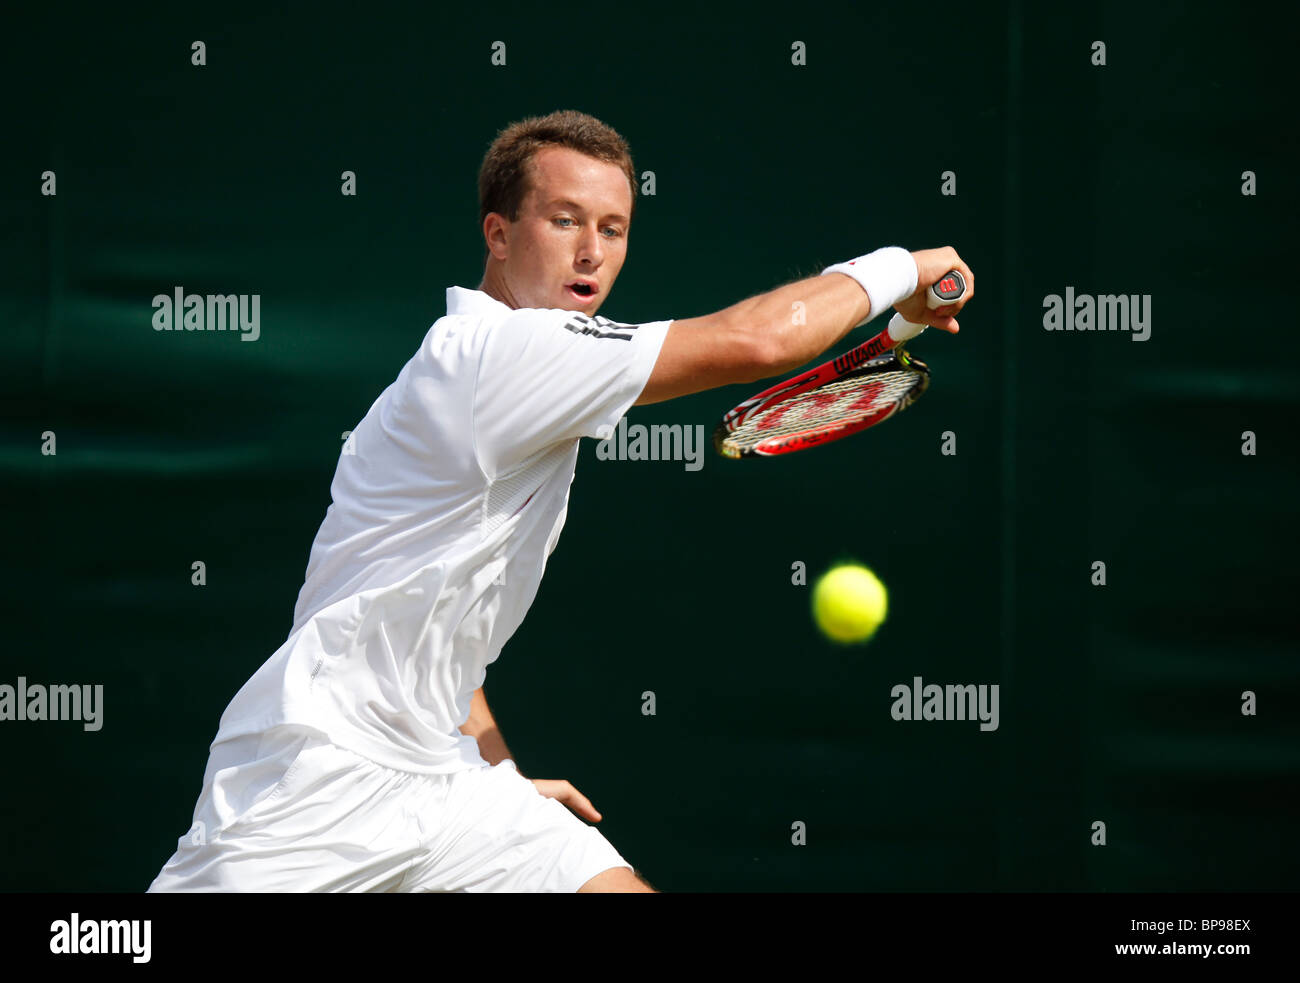 Philipp Kohlschreiber of Germany in action at the 2010 Wimbledon Championships Stock Photo